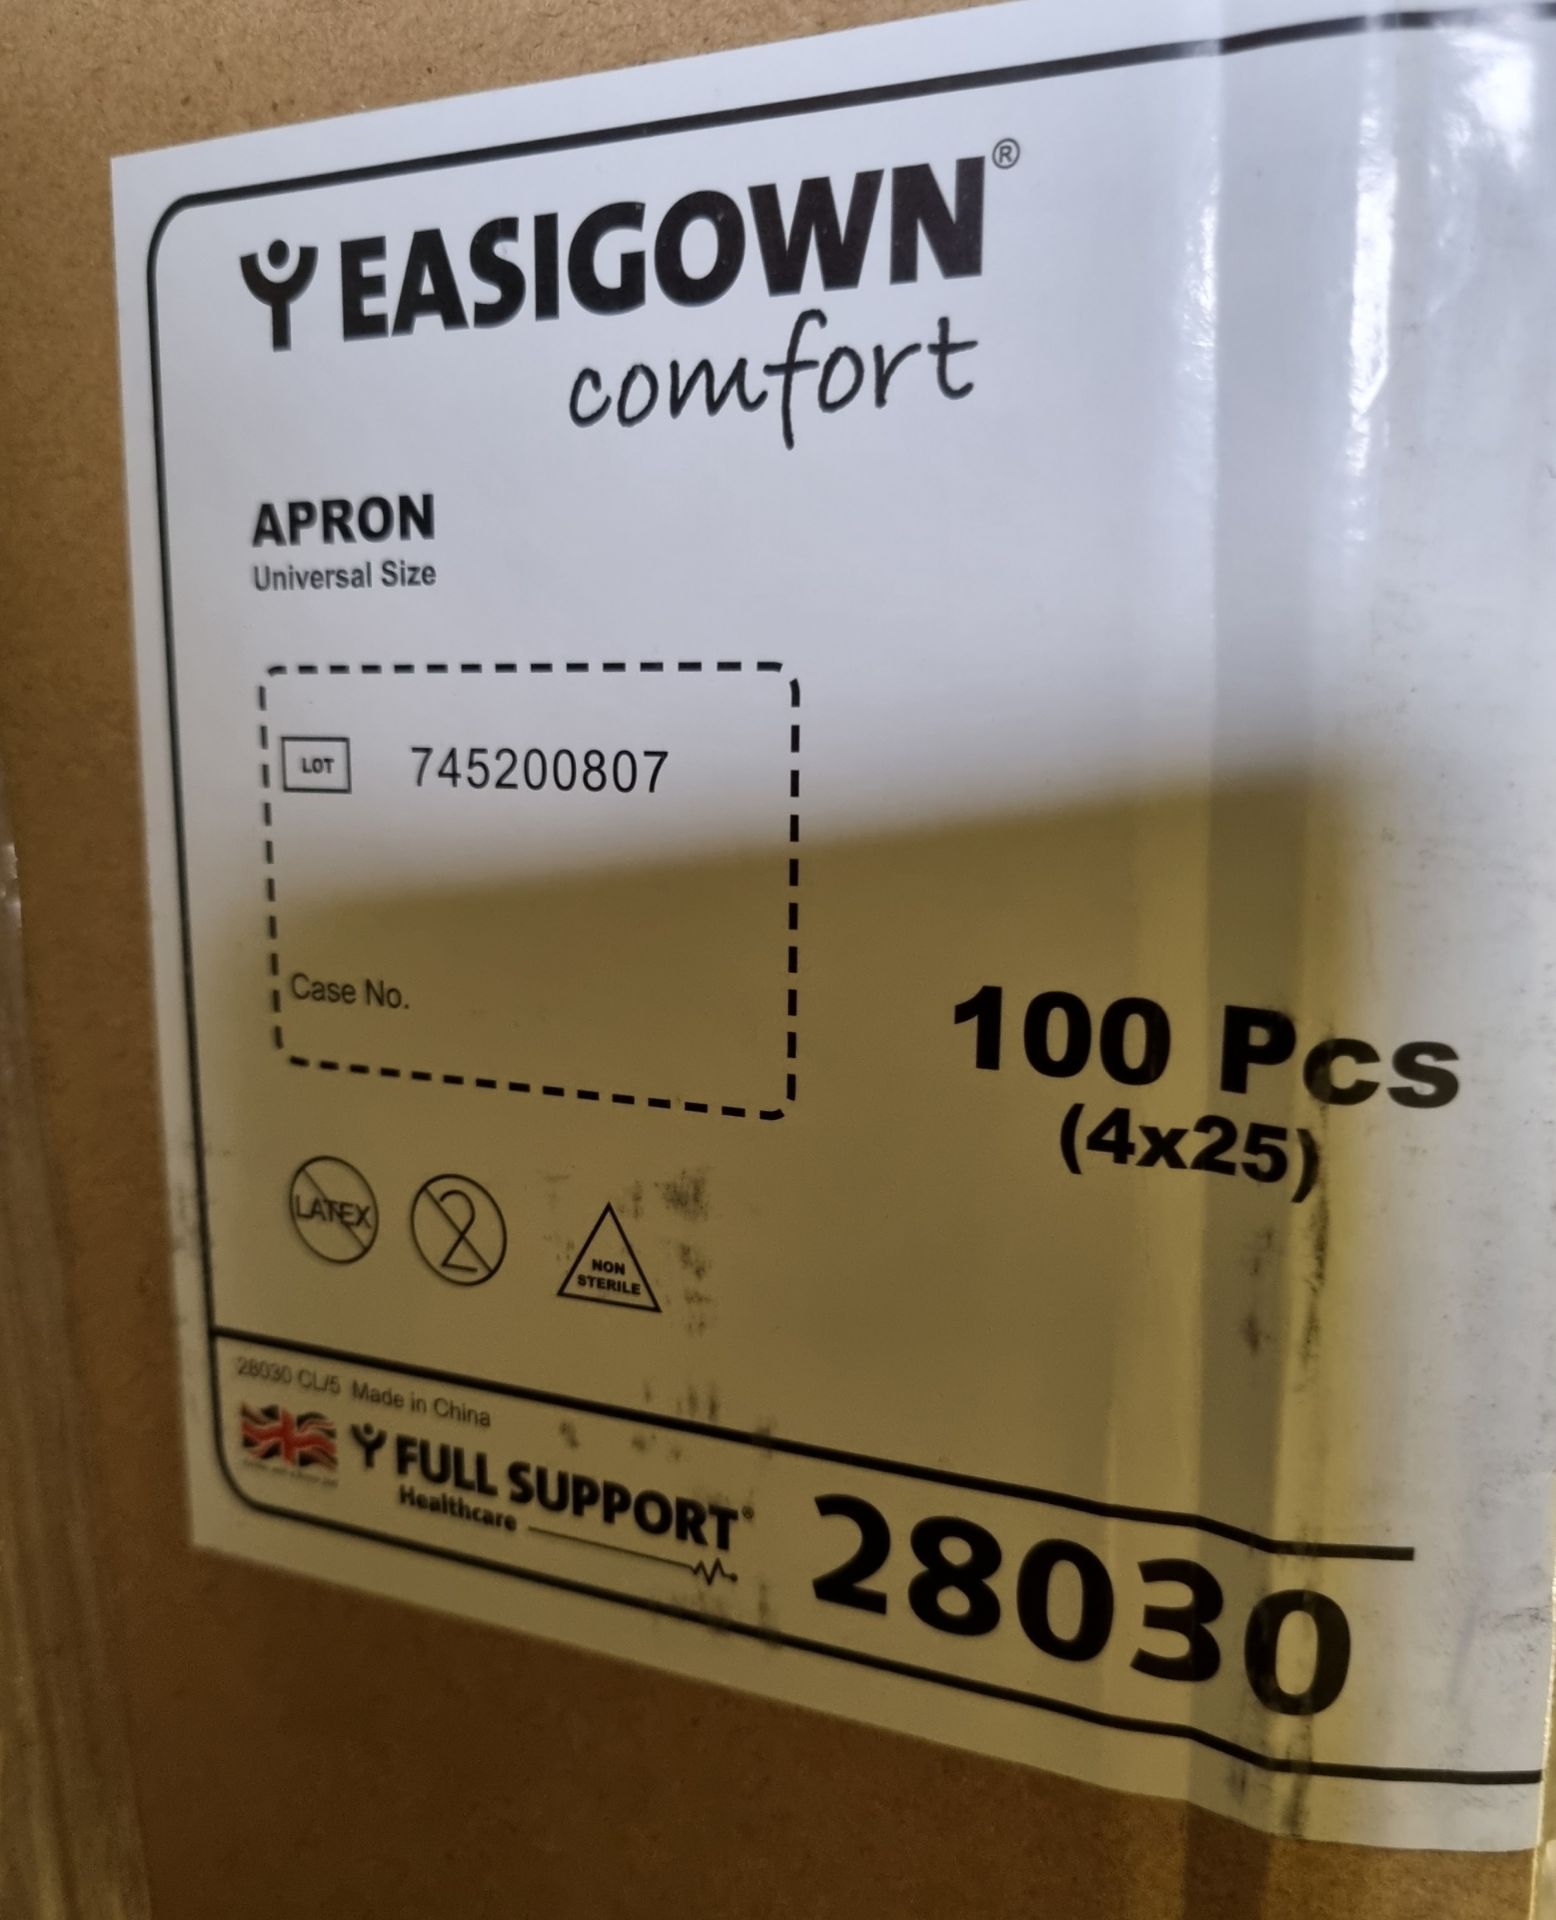 33x boxes of Easi Gown 28030 Comfort Aprons - thumb looped aprons for full body and arm protection - Image 2 of 4